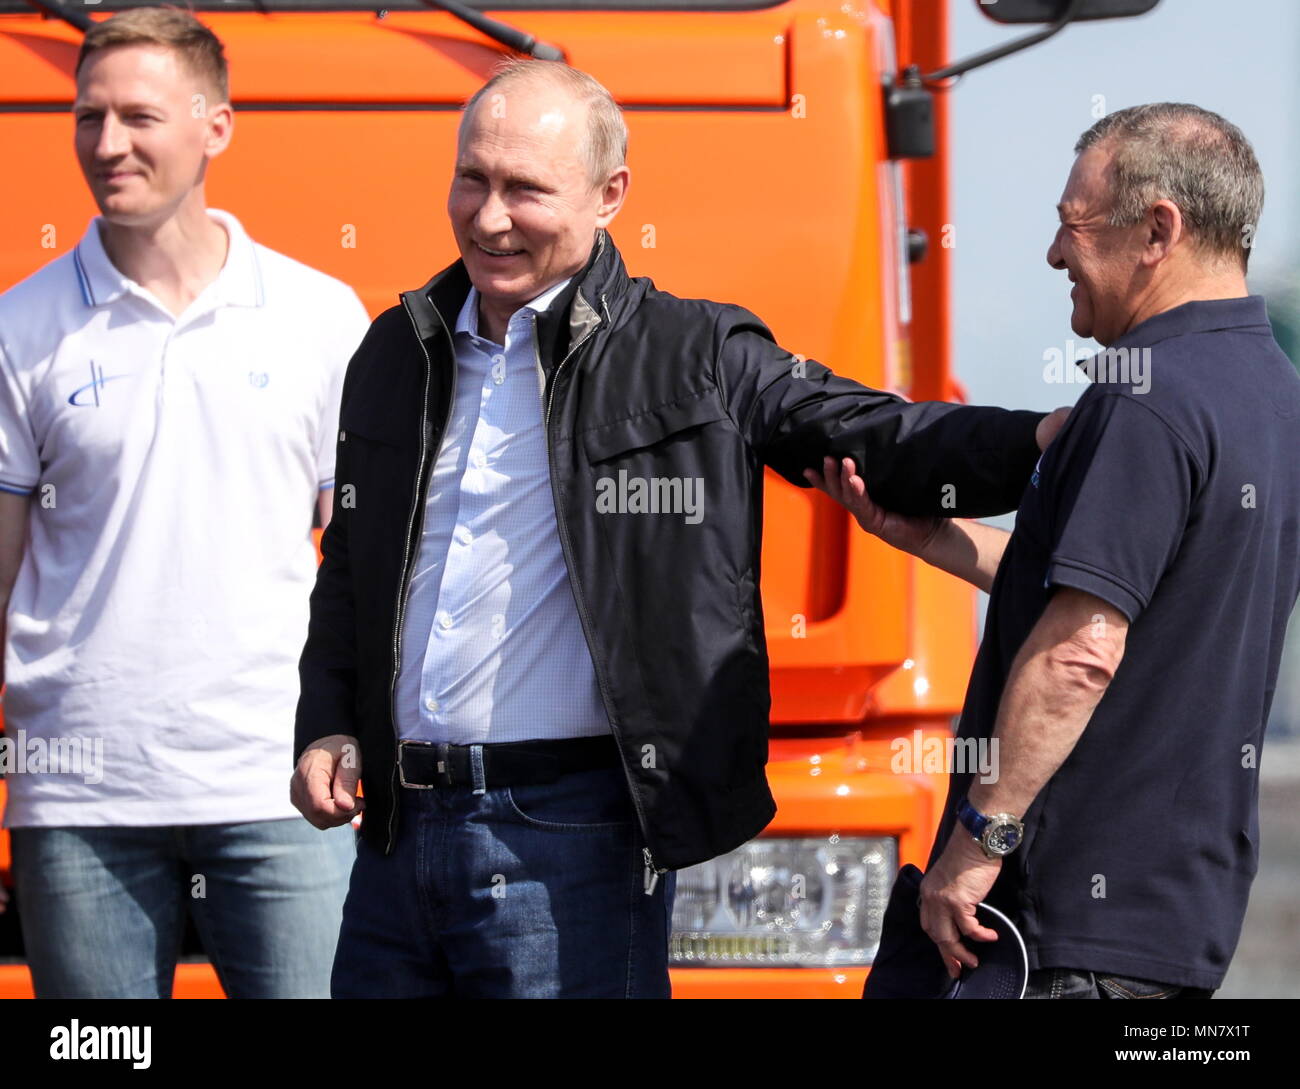 kerch-russia-15th-may-2018-kerch-russia-may-15-2018-russias-president-vladimir-putin-c-and-arkady-rotenberg-r-chairman-of-the-board-of-directors-at-smp-bank-seen-by-the-lead-vehicle-a-kamaz-truck-after-a-passage-of-construction-machines-over-the-kerch-strait-crimean-bridge-the-road-rail-bridge-across-the-kerch-strait-linking-crimea-to-mainland-russia-will-open-to-automobile-traffic-in-both-directions-on-may-16-2018-sergei-bobylevtass-credit-itar-tass-news-agencyalamy-live-news-MN7X1T.jpg